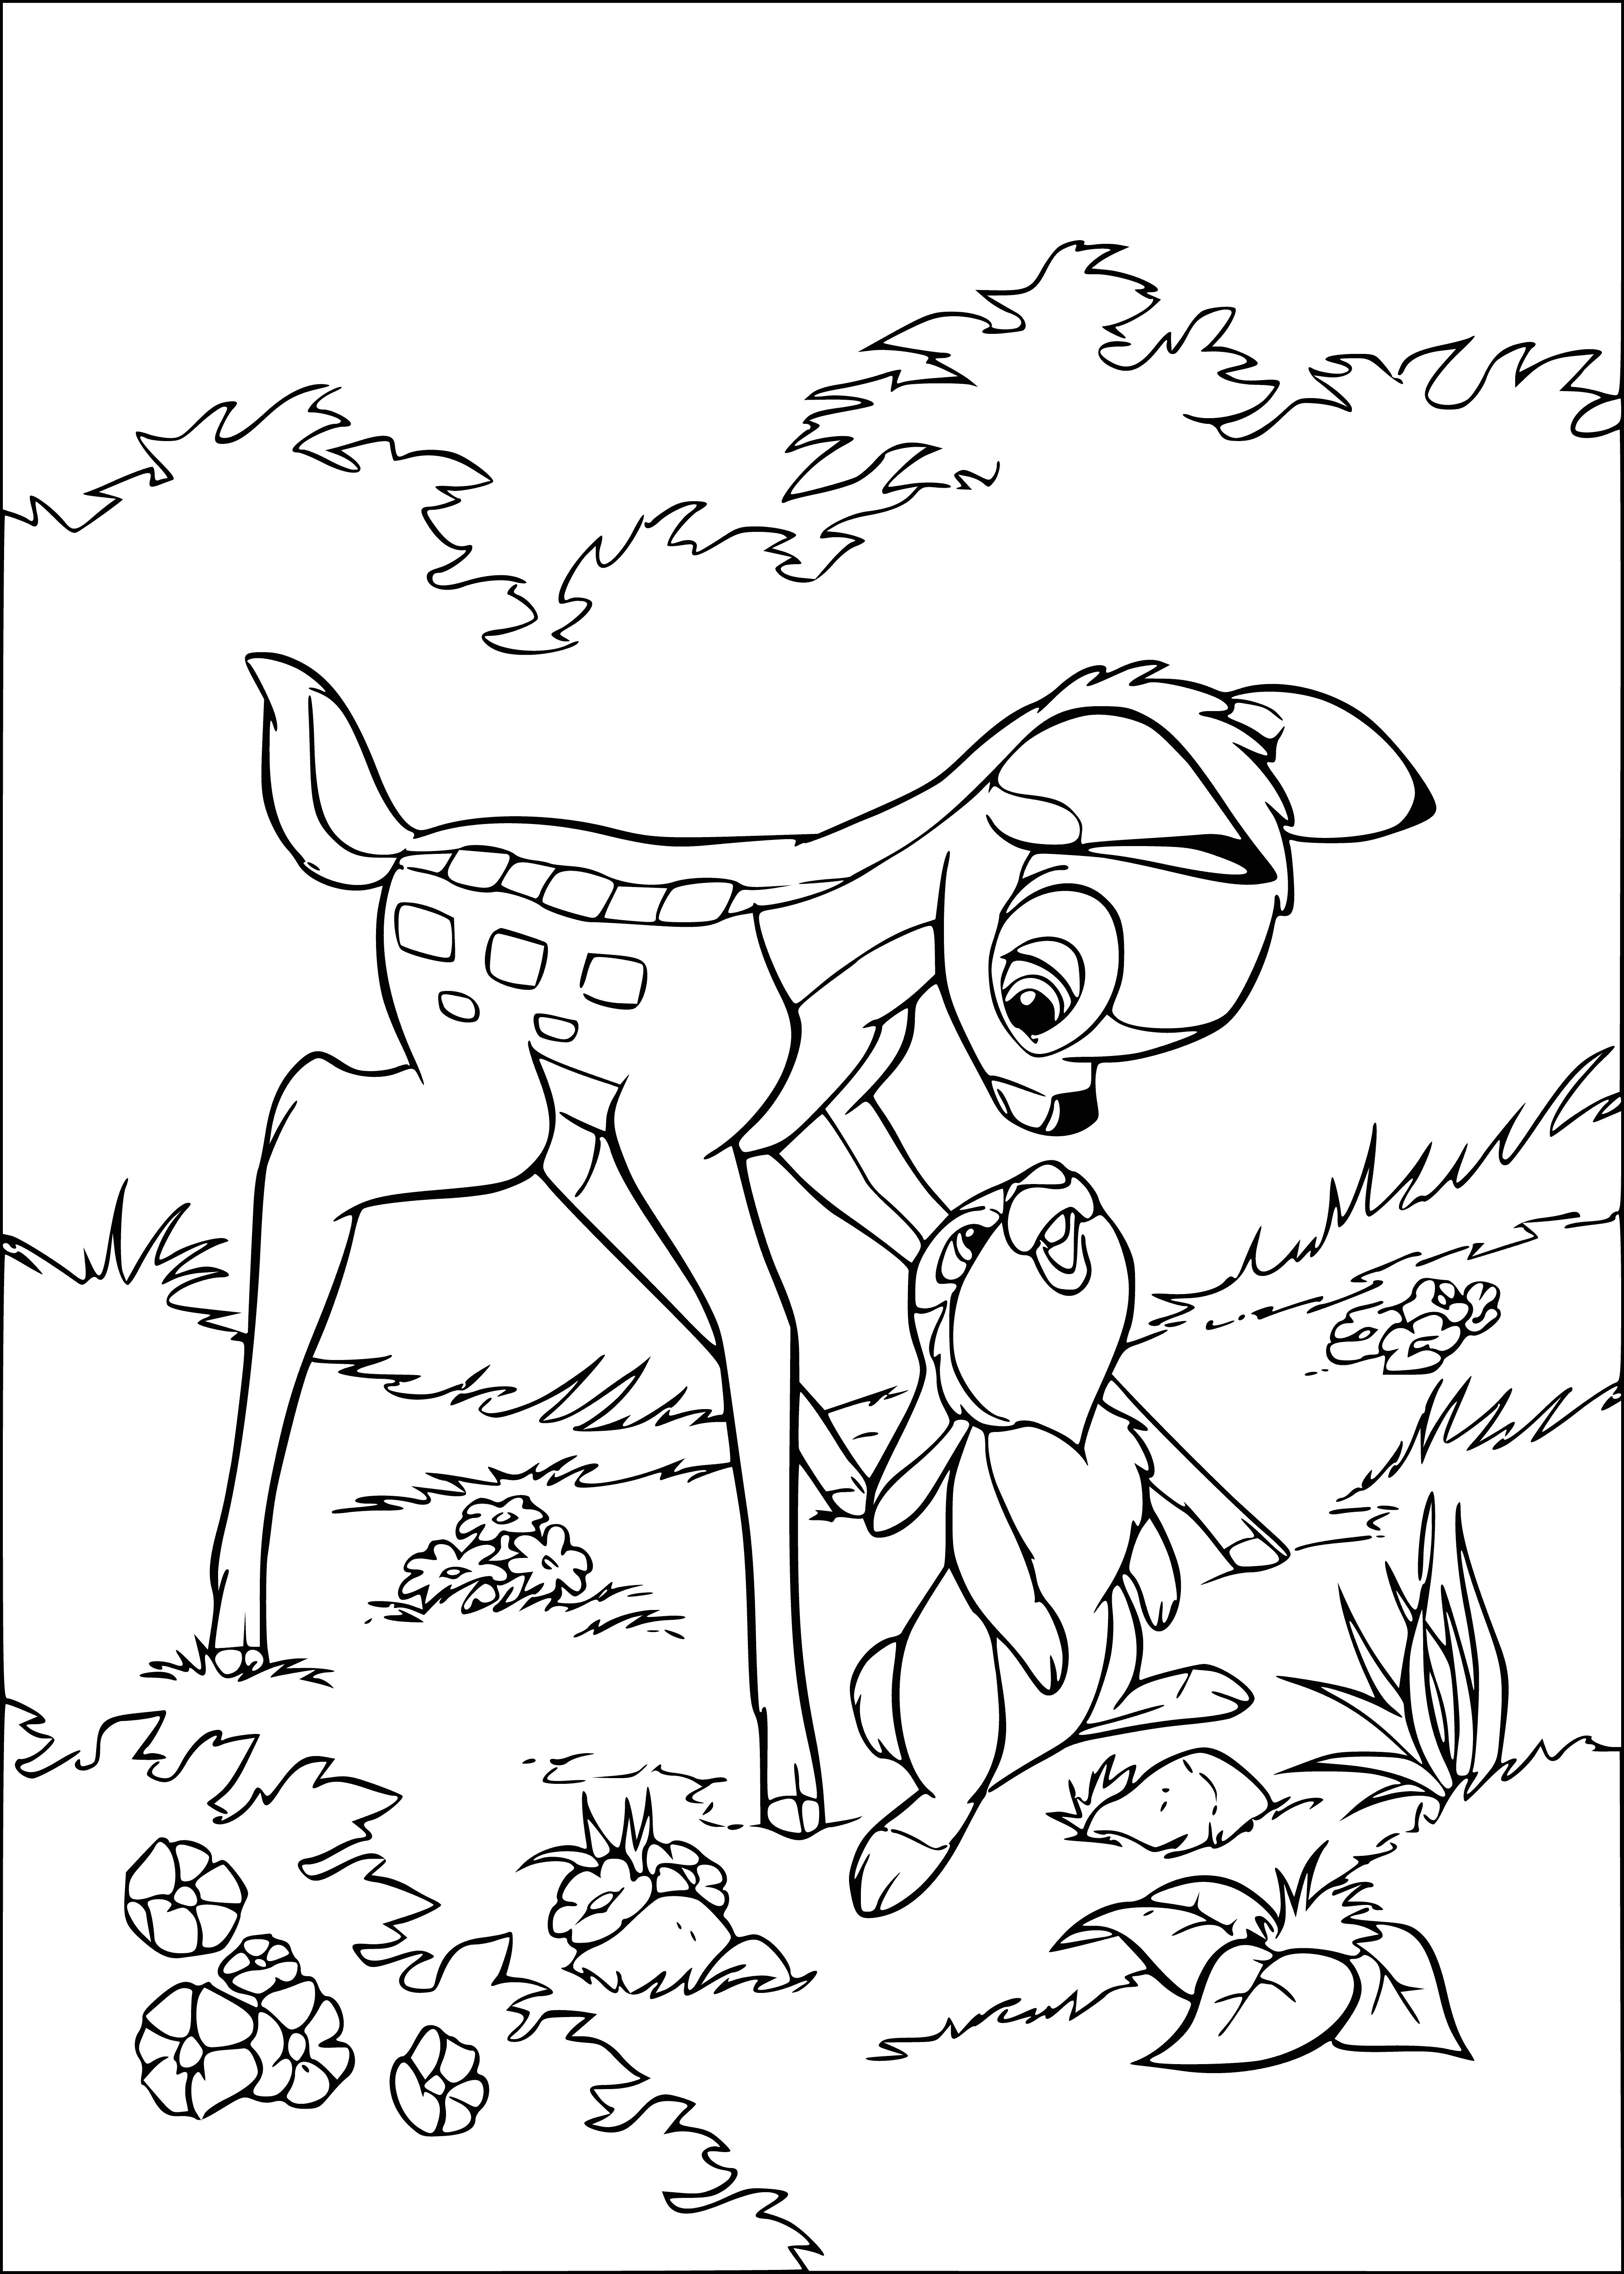 coloring page: Deer, rabbit, bird, and squirrel walk together like friends in snowy forest.